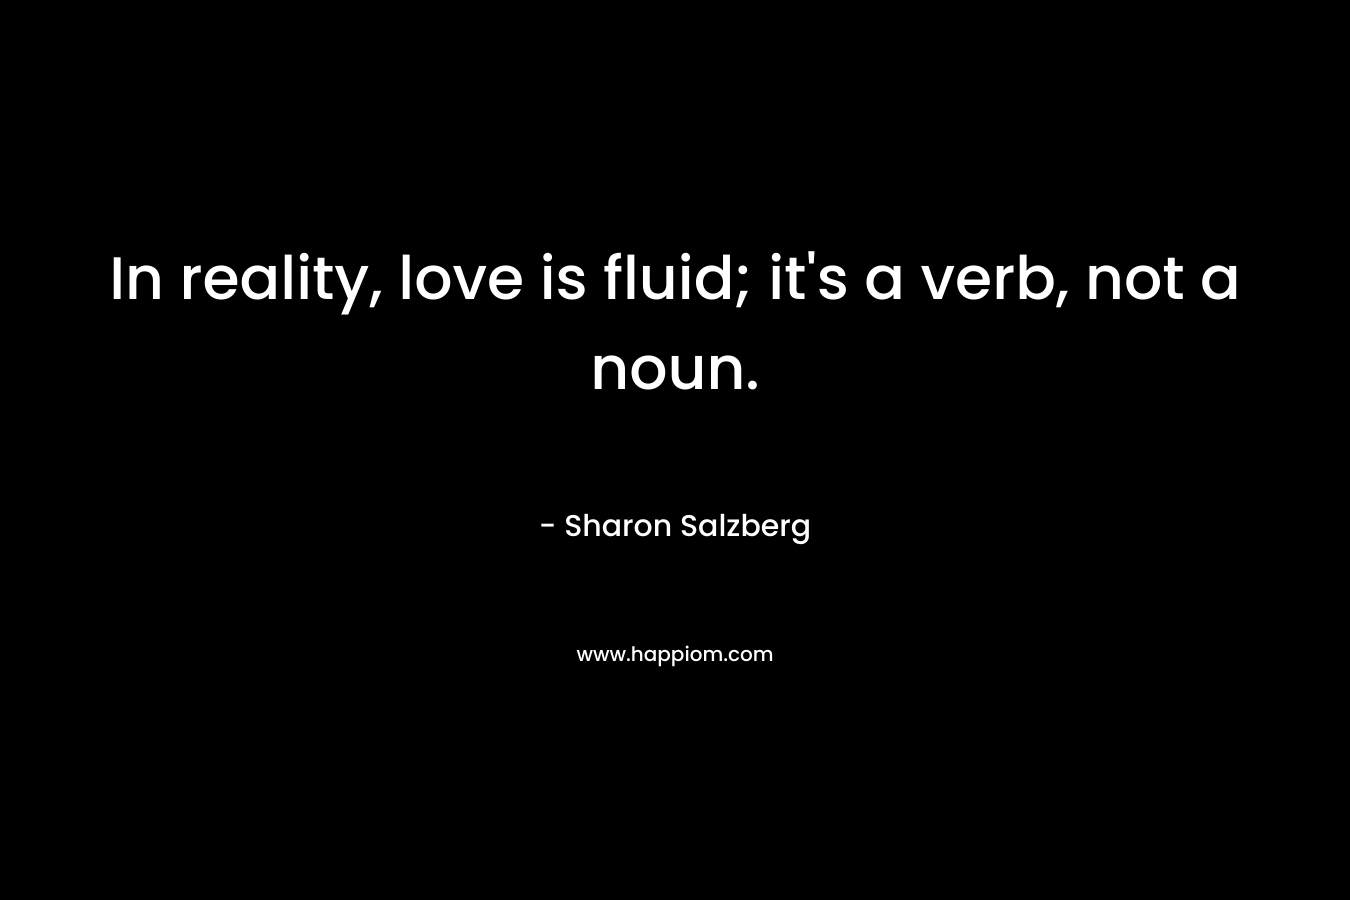 In reality, love is fluid; it’s a verb, not a noun. – Sharon Salzberg